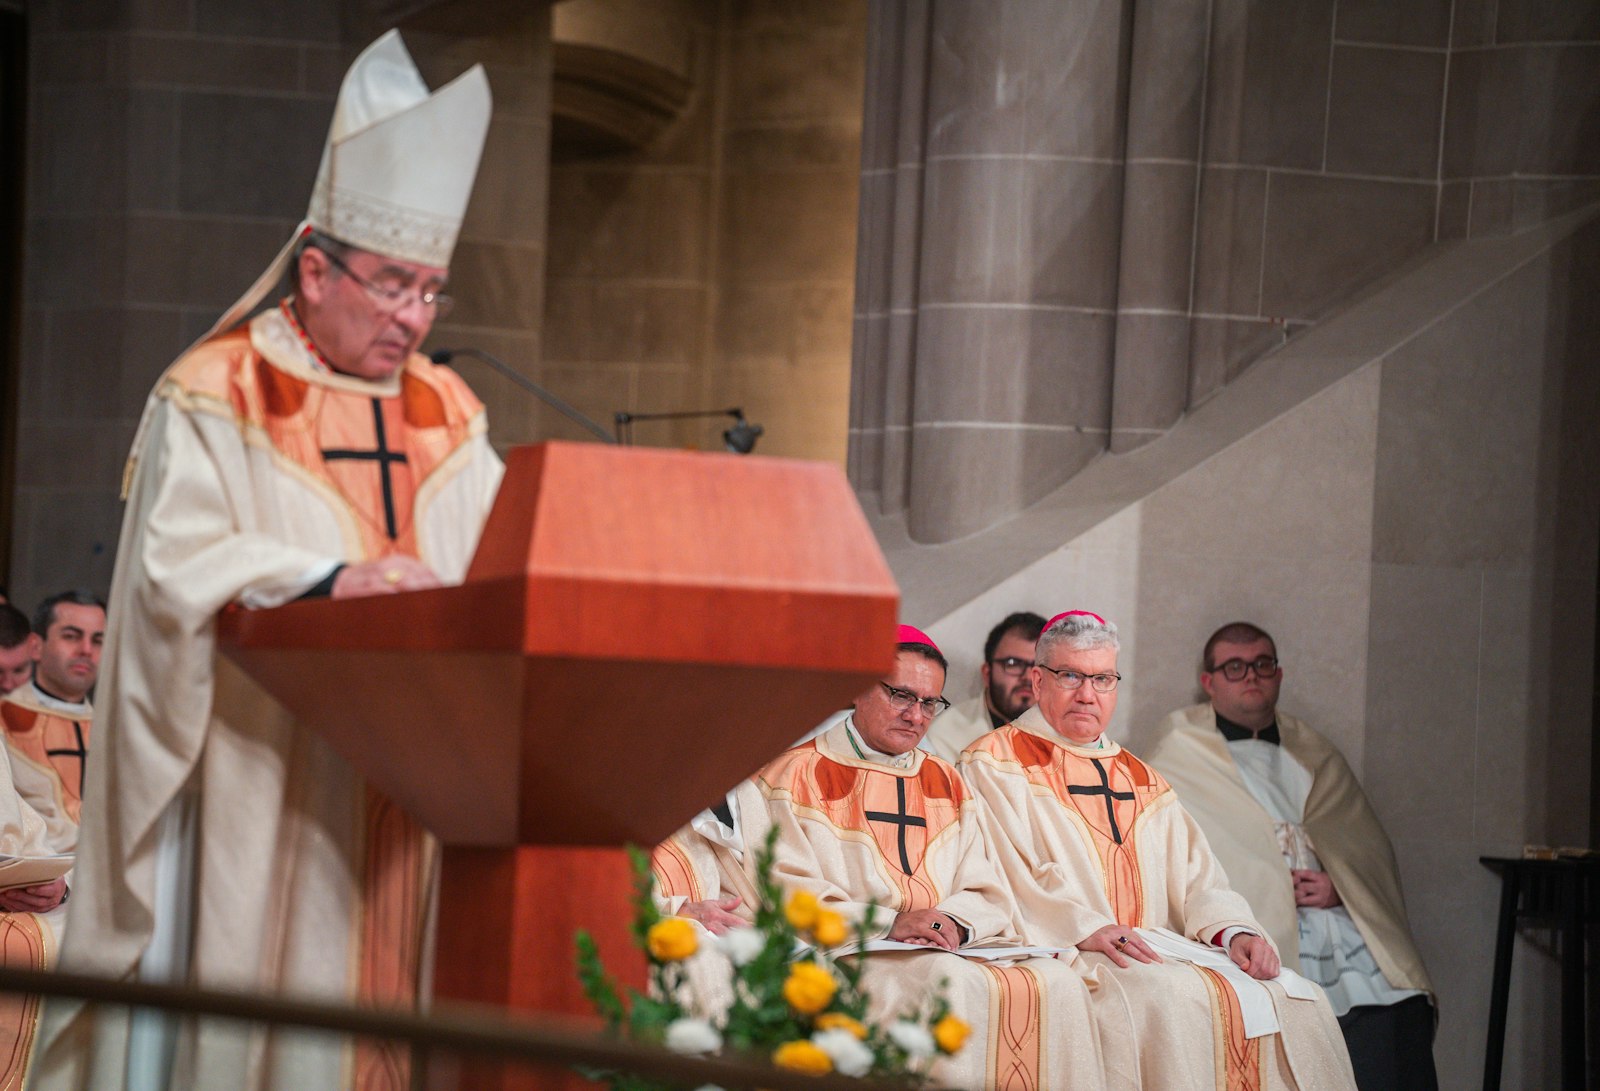 Bishop Monforton, right, listens as Cardinal Christophe Pierre, apostolic nuncio to the United States, reads the proclamation from Pope Francis assigning him to a new ministry in the Archdiocese of Detroit.